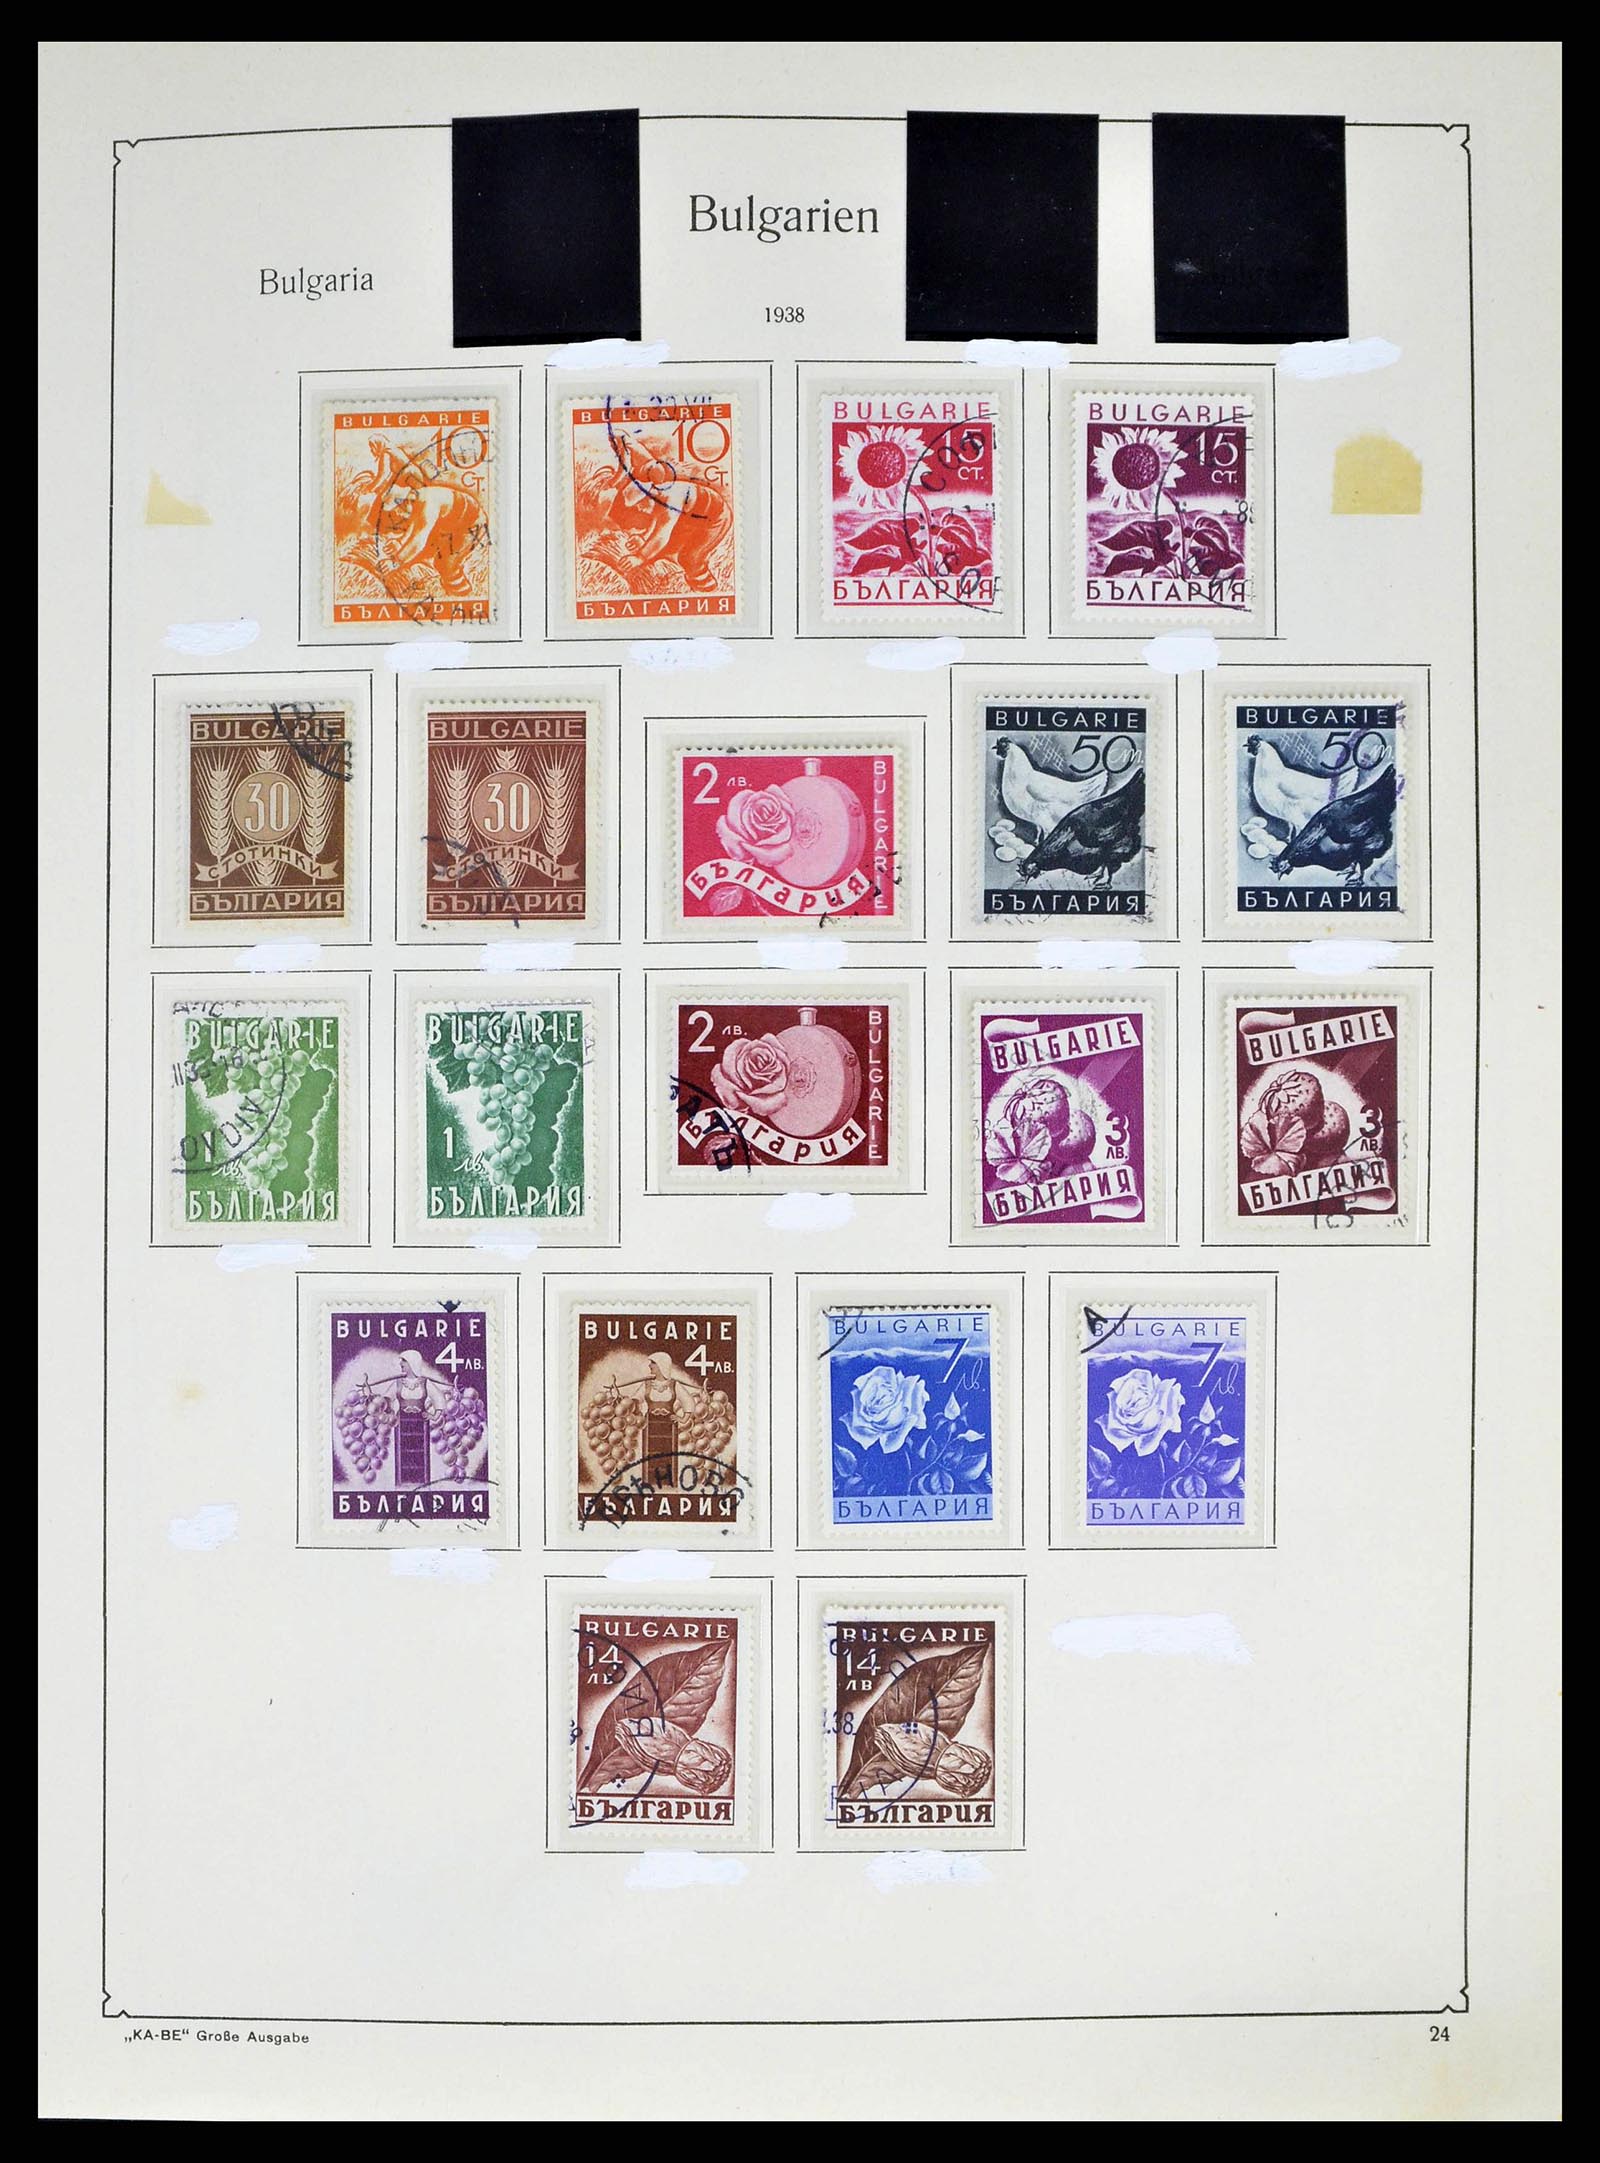 38486 0038 - Stamp collection 38486 Bulgaria 1879-1959.